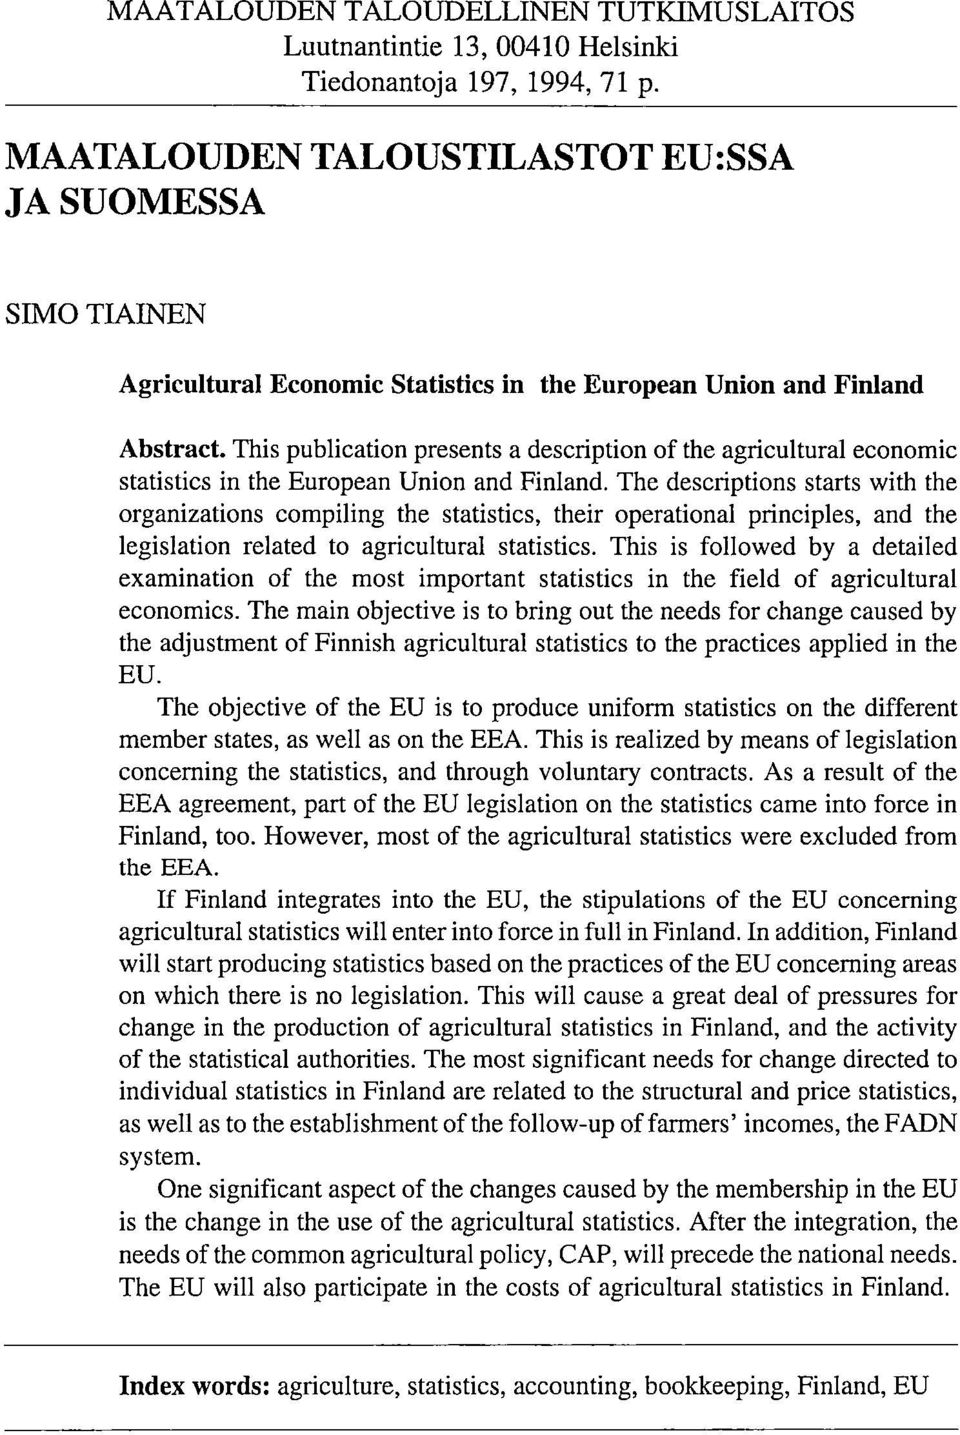 This publication presents a description of the agricultural economic statistics in the European Union and Finland.